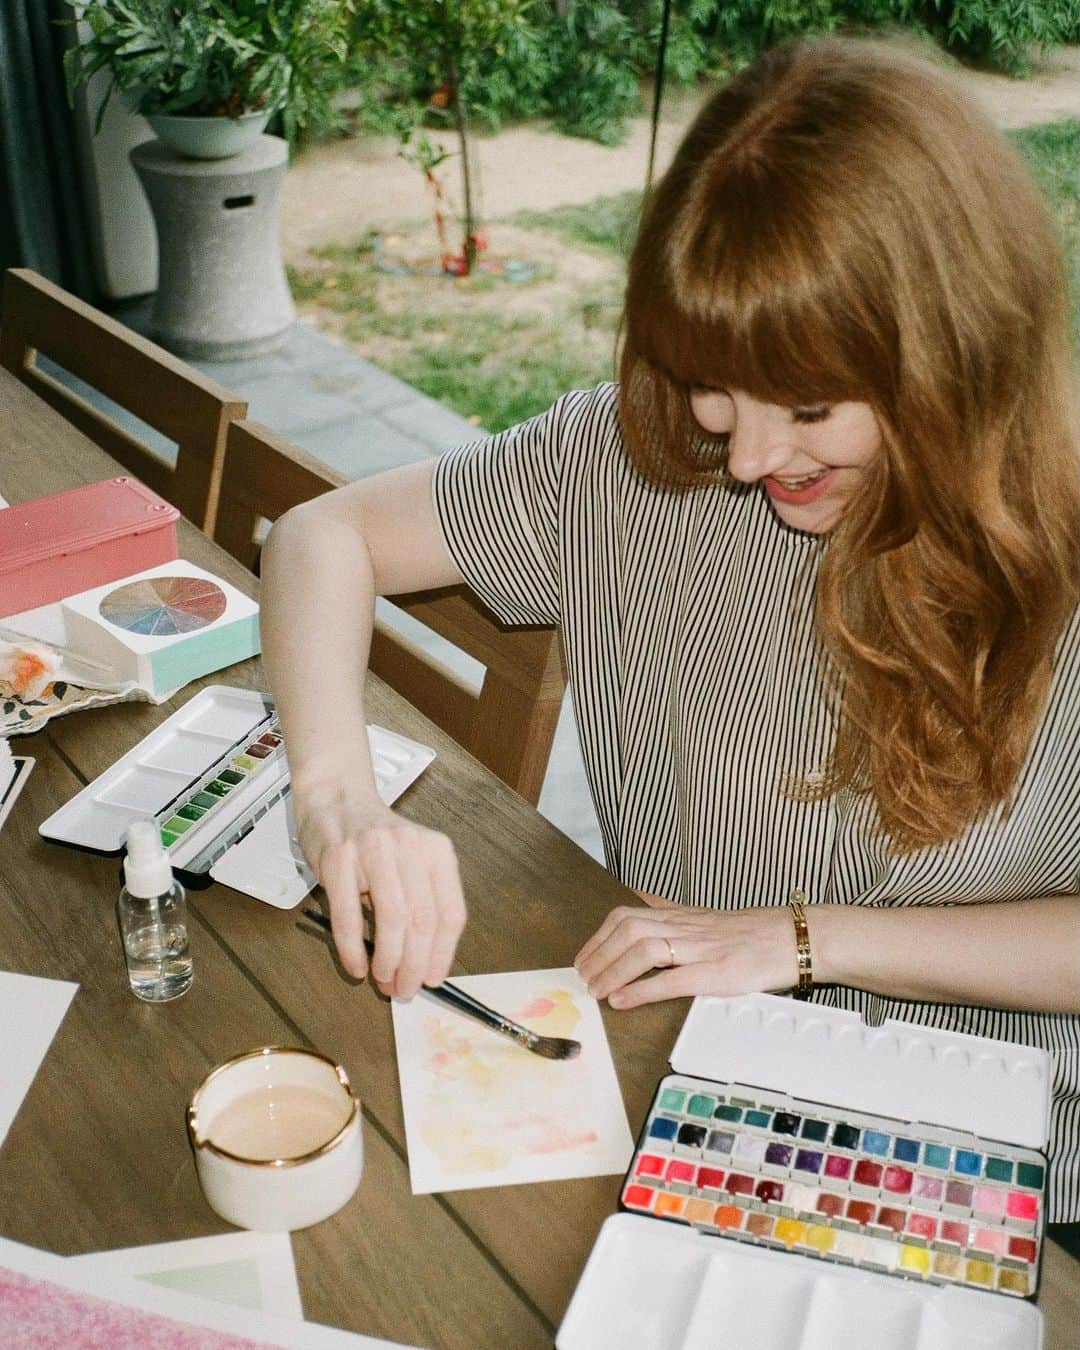 ブライス・ダラス・ハワードさんのインスタグラム写真 - (ブライス・ダラス・ハワードInstagram)「Happy #WorldWatercolorMonth! On July 15th I’ll be hosting my first ever FREE ONLINE WATERCOLOR & CREATIVITY CLASS taught by the talented Bindi Desai (@create__d)!! 🎨  ⁣ When it comes to watercolor, I’m a beginner (an extremely obsessed one) and until this year had never taken a lesson 🤫 I’d been a fan of Bindi’s work on IG, so when she DM’d me, saying she offered classes, I signed up immediately:) ⁣ ⁣ Since then, we’ve met every week, and I am so grateful to Bindi for everything she teaches me -- and now for everything that she will teach you! ⁣ ⁣ The biggest revelation these last few months: pursuing a hobby is an opportunity to try, fail, and manage the feelings that arise when attempting something new.⁣ ⁣ Again and again I see my best results happen when I stay playful, loosen up, and enjoy the process. But more importantly, I’ve realized that the more I practice “being brave” with paper and paint, the more easily I can handle uncomfortable feelings that come up when I am being called upon to “be brave” in life.⁣ ⁣ The good news is that Bindi has empowered me to create work I’m proud of even though I’m a beginner, even when I’m feeling  hesitant about a new skill or frustrated by my lack of experience. Her process allows me to develop tools to work on overriding fear and doubt -- and the more I practice being in this state, the better.  ⁣ So in this workshop, Bindi will teach us how to paint an abstract piece and afterward we'll have a relaxed Q&A session to address creative stressors and strategies for overcoming them. It’ll be a chill, judgment-free space to immerse yourself in the world of watercolor 😌⁣ ⁣ If this sounds at all interesting, please RSVP to our free workshop “How to Be Brave (In Life & Watercolor)” on Saturday July 15. You can sign up today at the link in bio 🔗⁣ ⁣ Looking forward to painting with you! ❤️⁣ ⁣ 📸: Andie Jane (@andiejjane)⁣ ⁣ #BryceDallasHoward #WatercolorArt #CreativeFlow #ArtTherapy #BeBrave」7月3日 4時48分 - brycedhoward